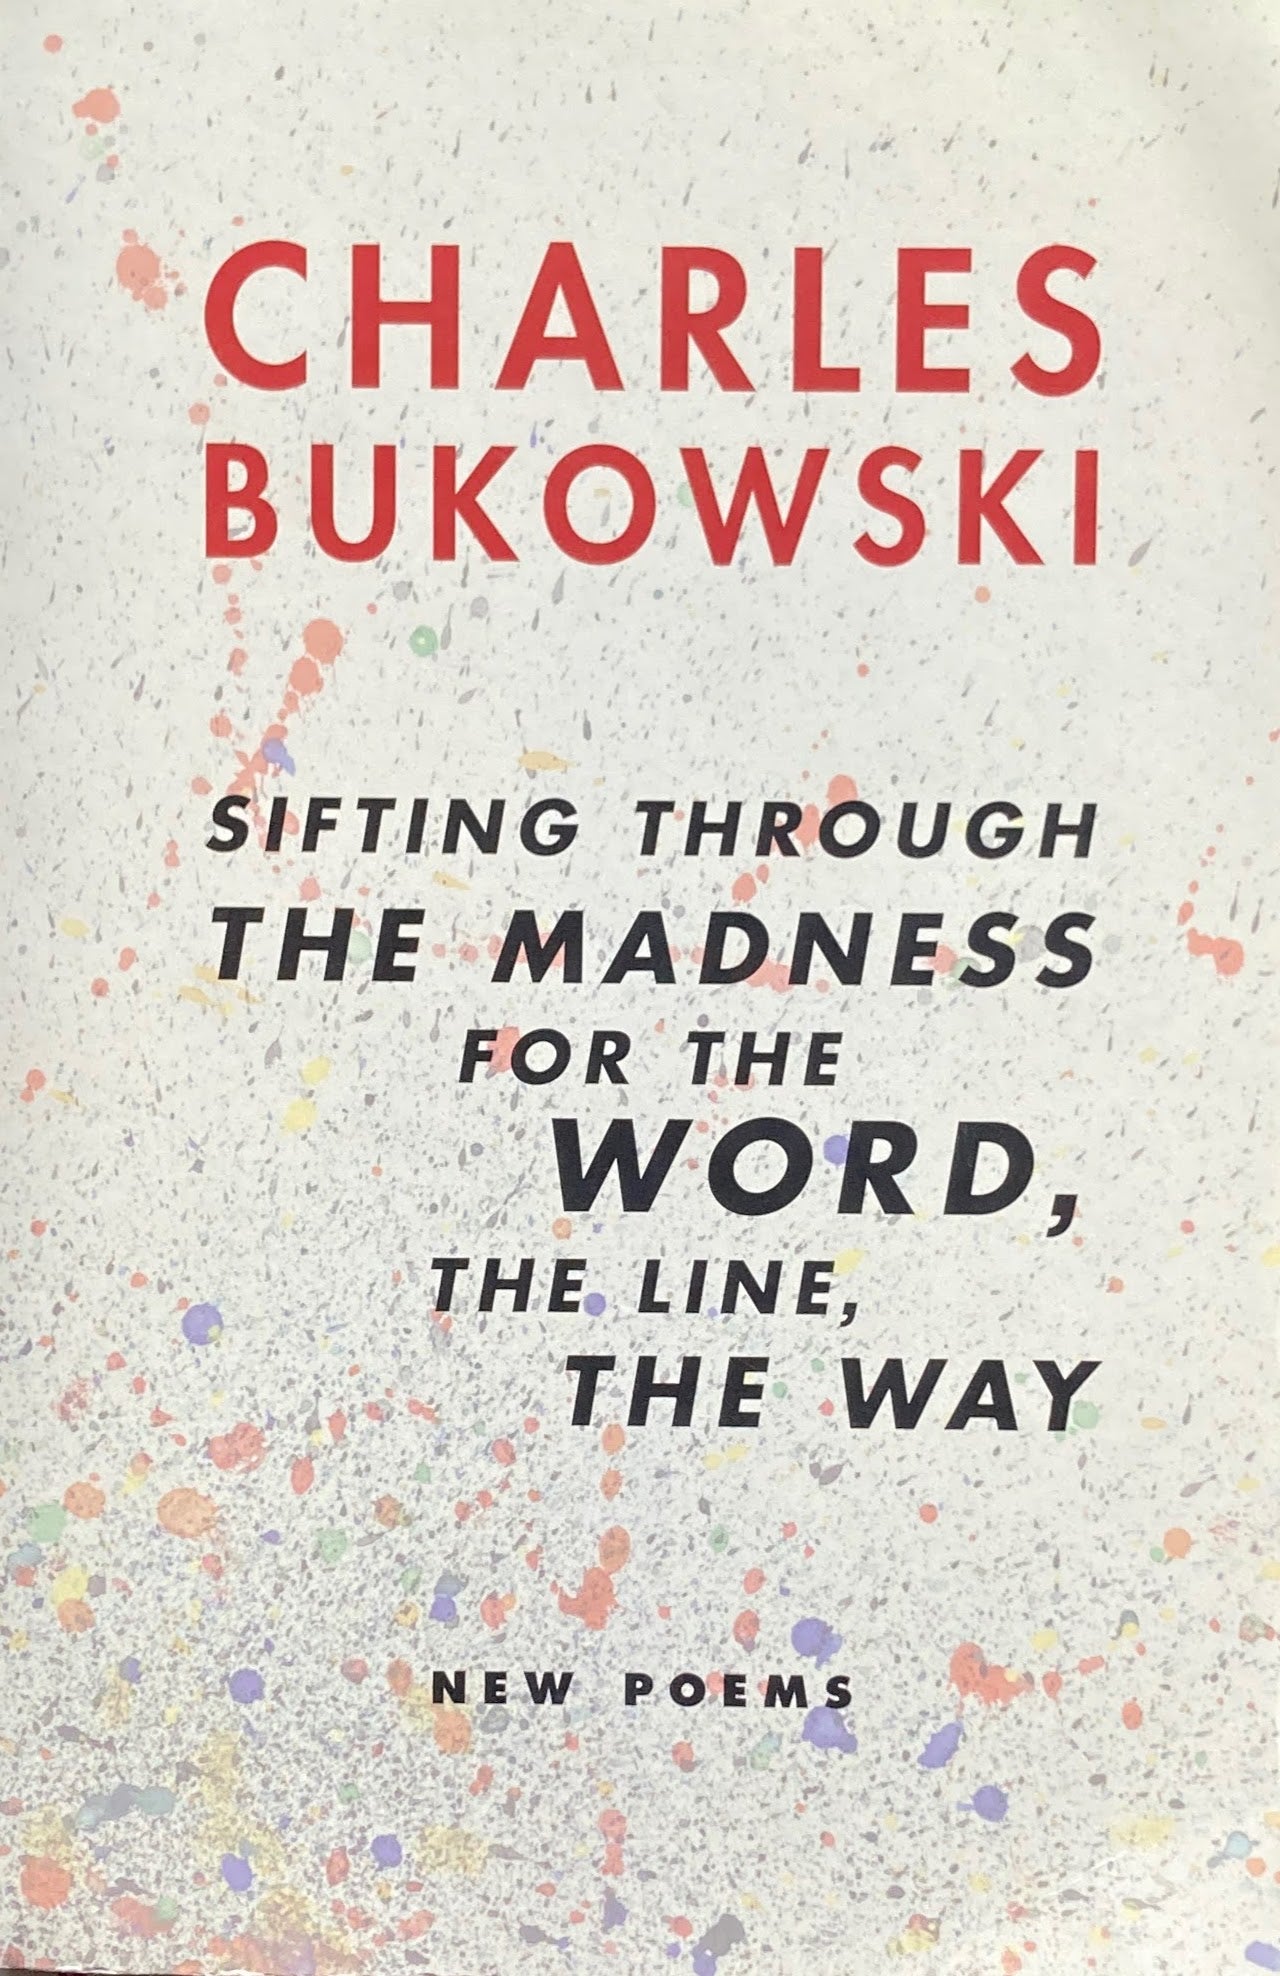 Sifting Through the Madness for the Word, the Line, the Way　New Poems 　Charles Bukowski 　チャールズ・ブコウスキー